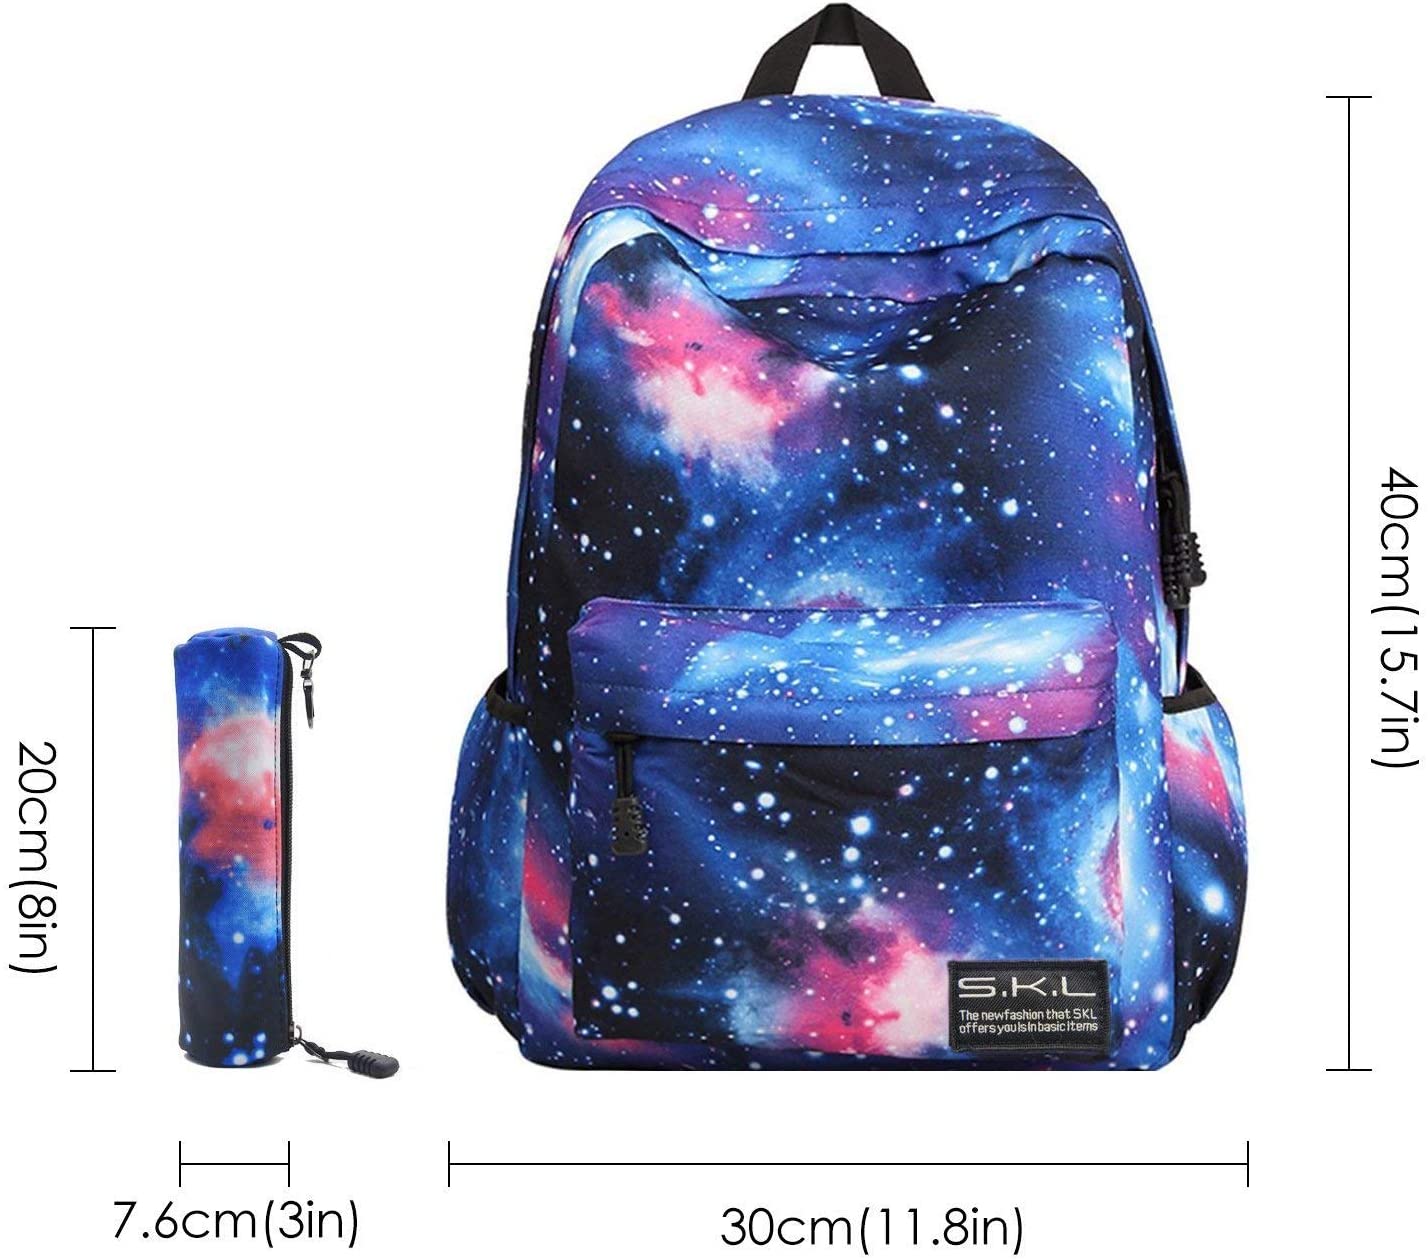 Galaxy School Backpack, SKL School Bag Student Stylish Unisex Canvas Laptop Book Bag Rucksack Daypack for Teen Boys and Girls(Blue with Pencil Bag)